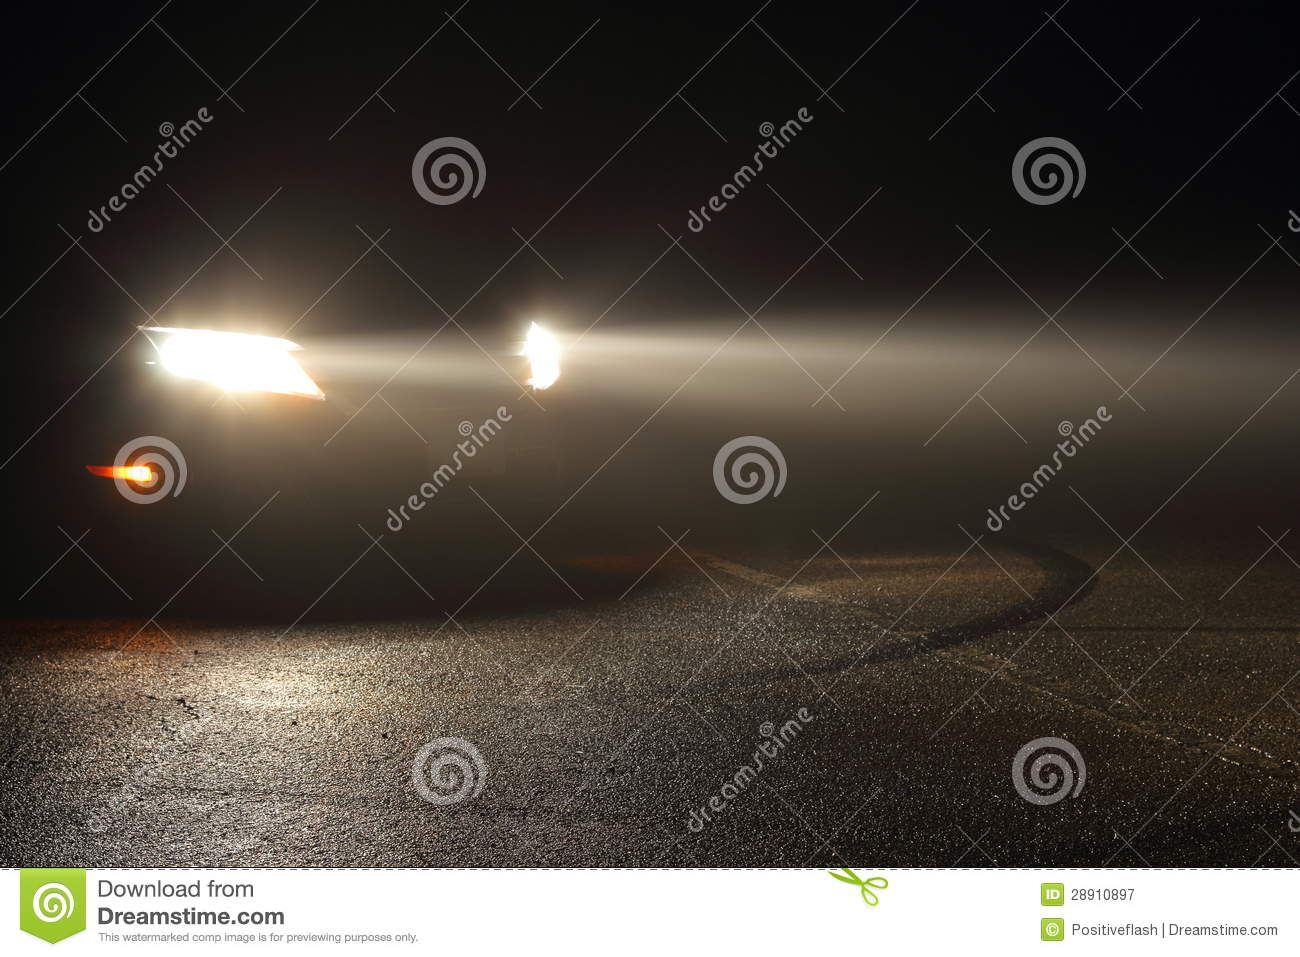 Car Headlights In Fog Royalty Free Stock Photography   Image  28910897